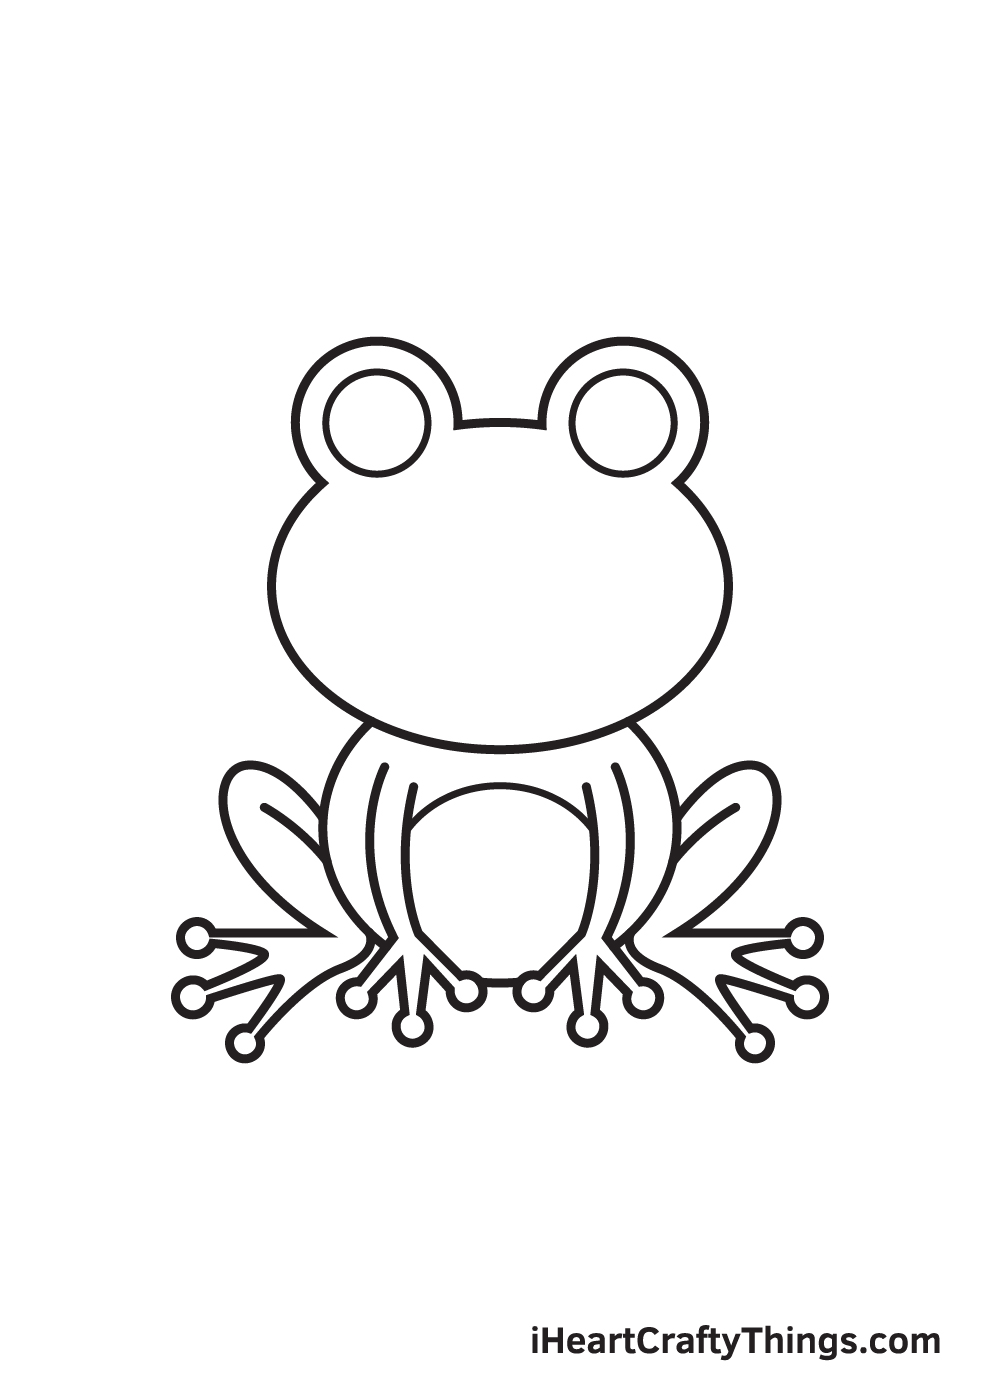 How to Draw a Frog in 12 Easy Steps - VerbNow